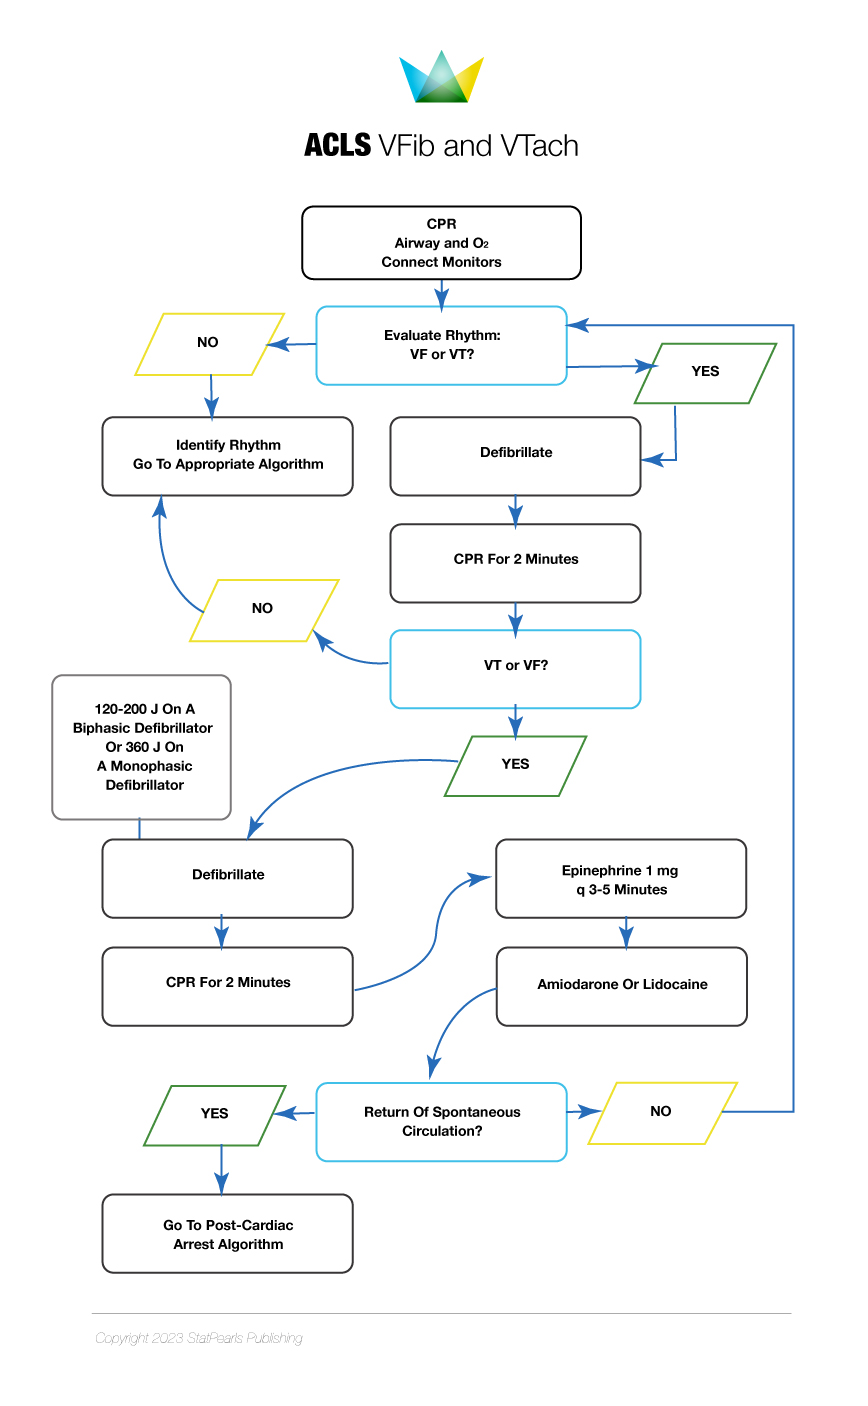 <p>ACLS Algorithm for VFib and VTach